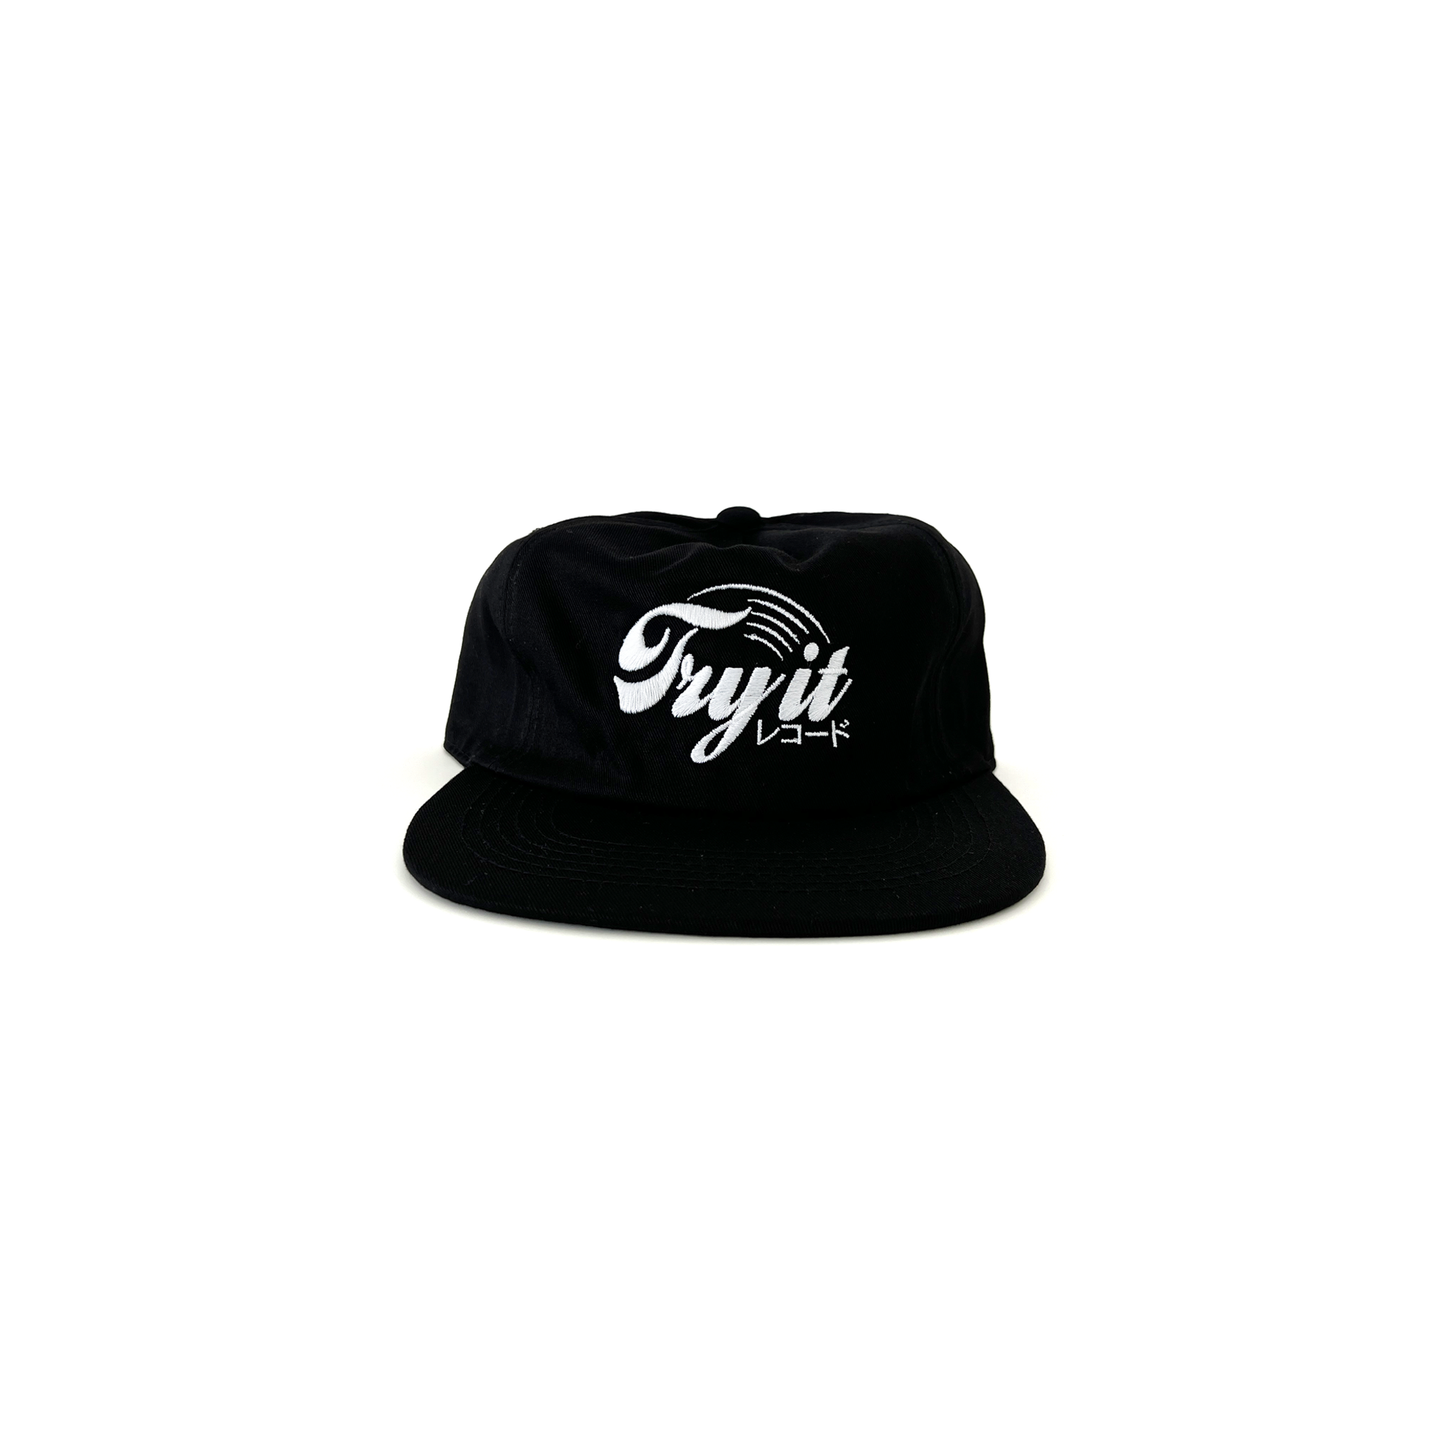 Try it Records Japan Hat